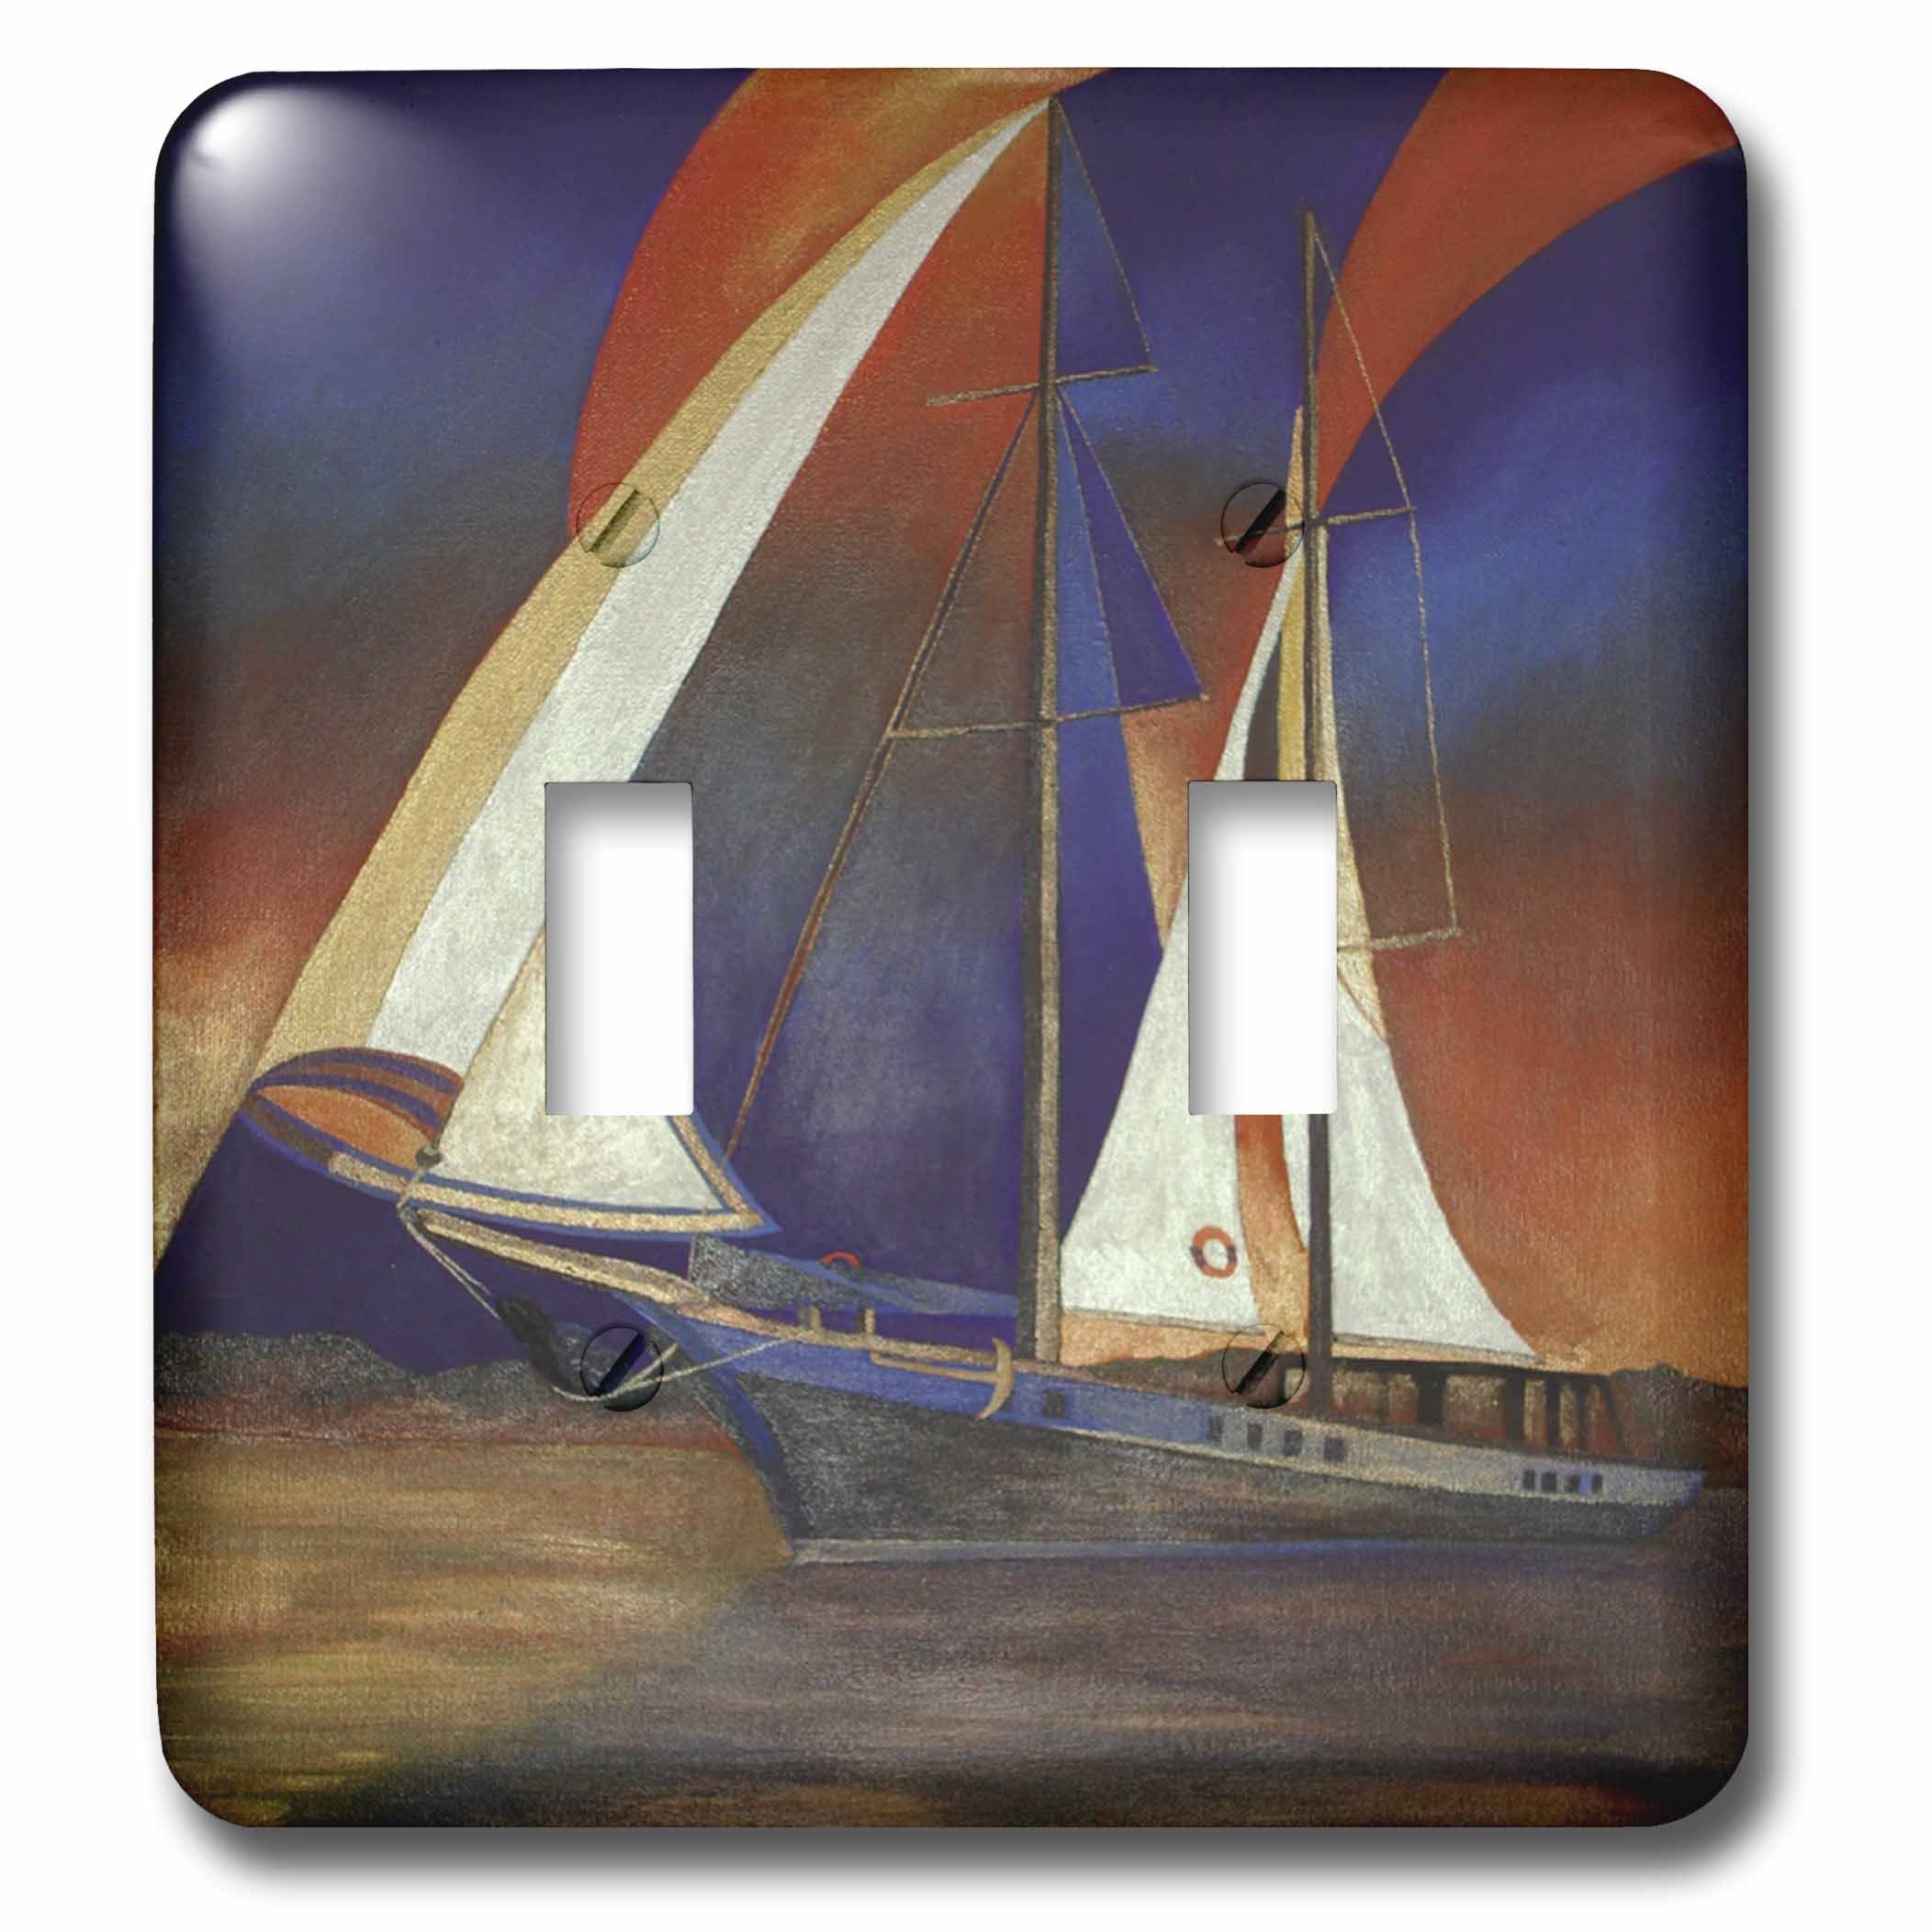 3dRose Gulet Under Sail - blue, boats, impressionism, orange, realism, sailboat, sails - Double Toggle Switch (lsp_46730_2) - image 1 of 1